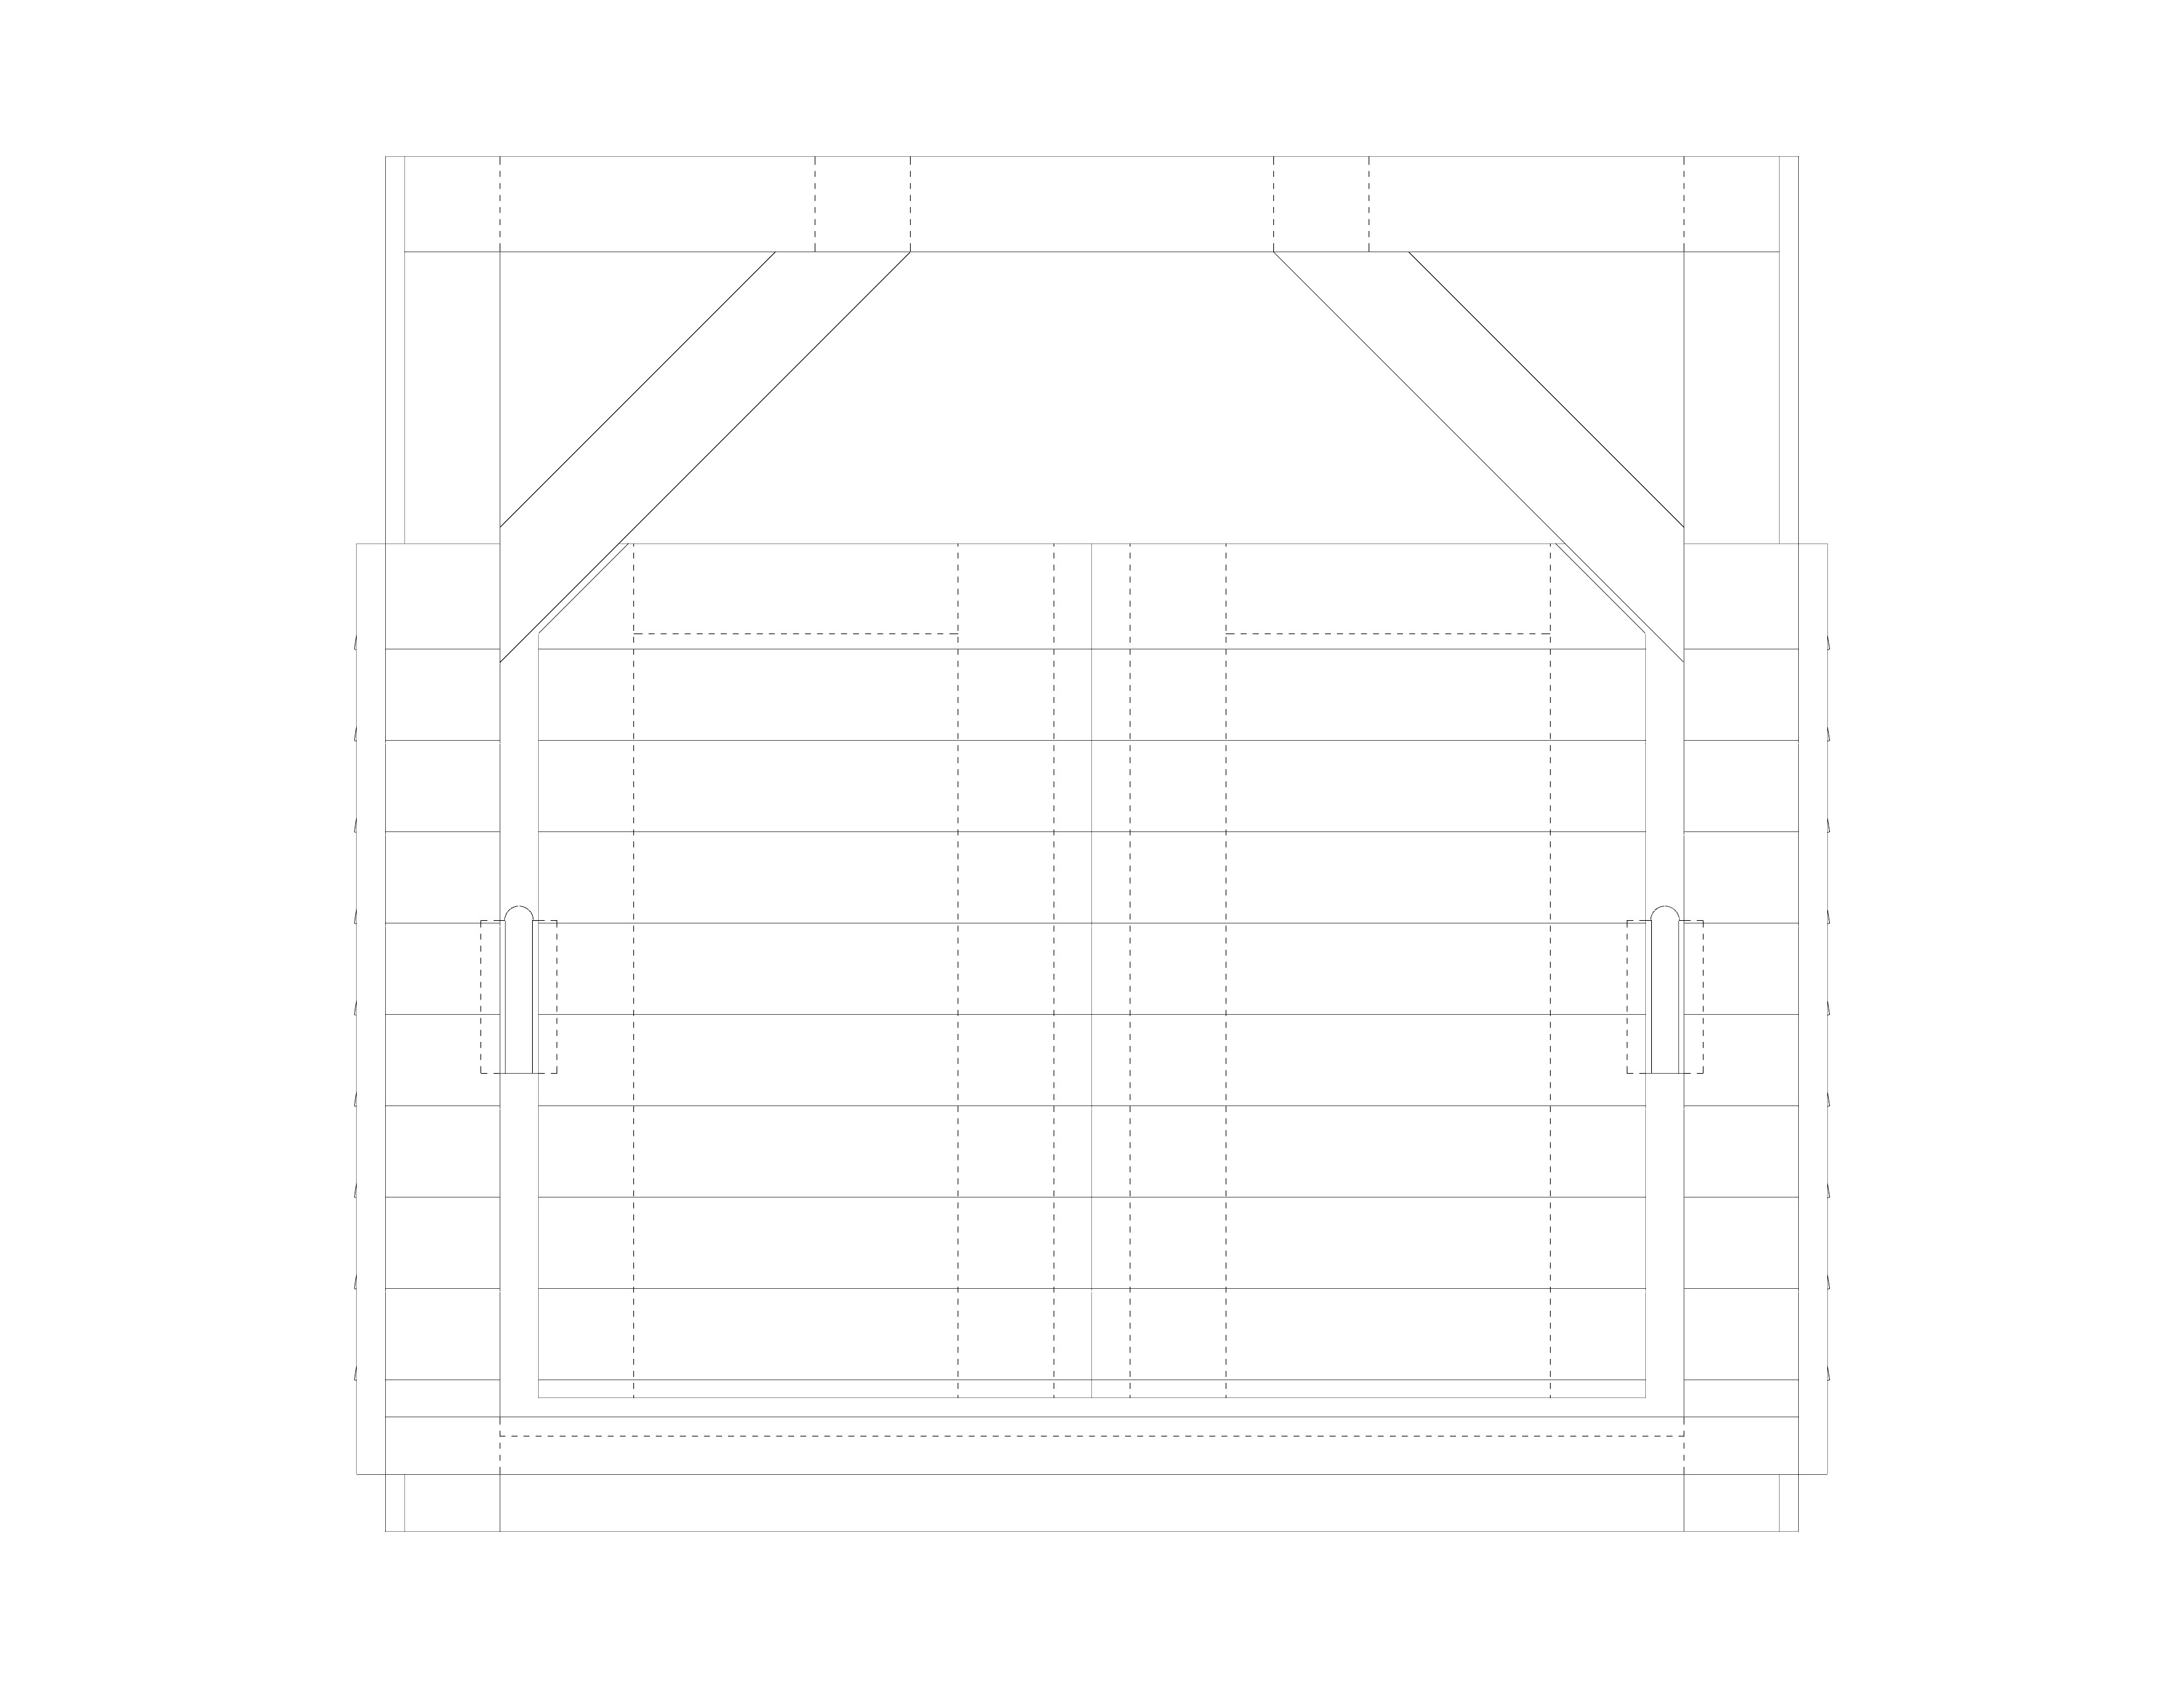 line drawing in black of dog crate viewed from the front. the hinges are drawn in using dashed lines. the design resembles a barn in miniature